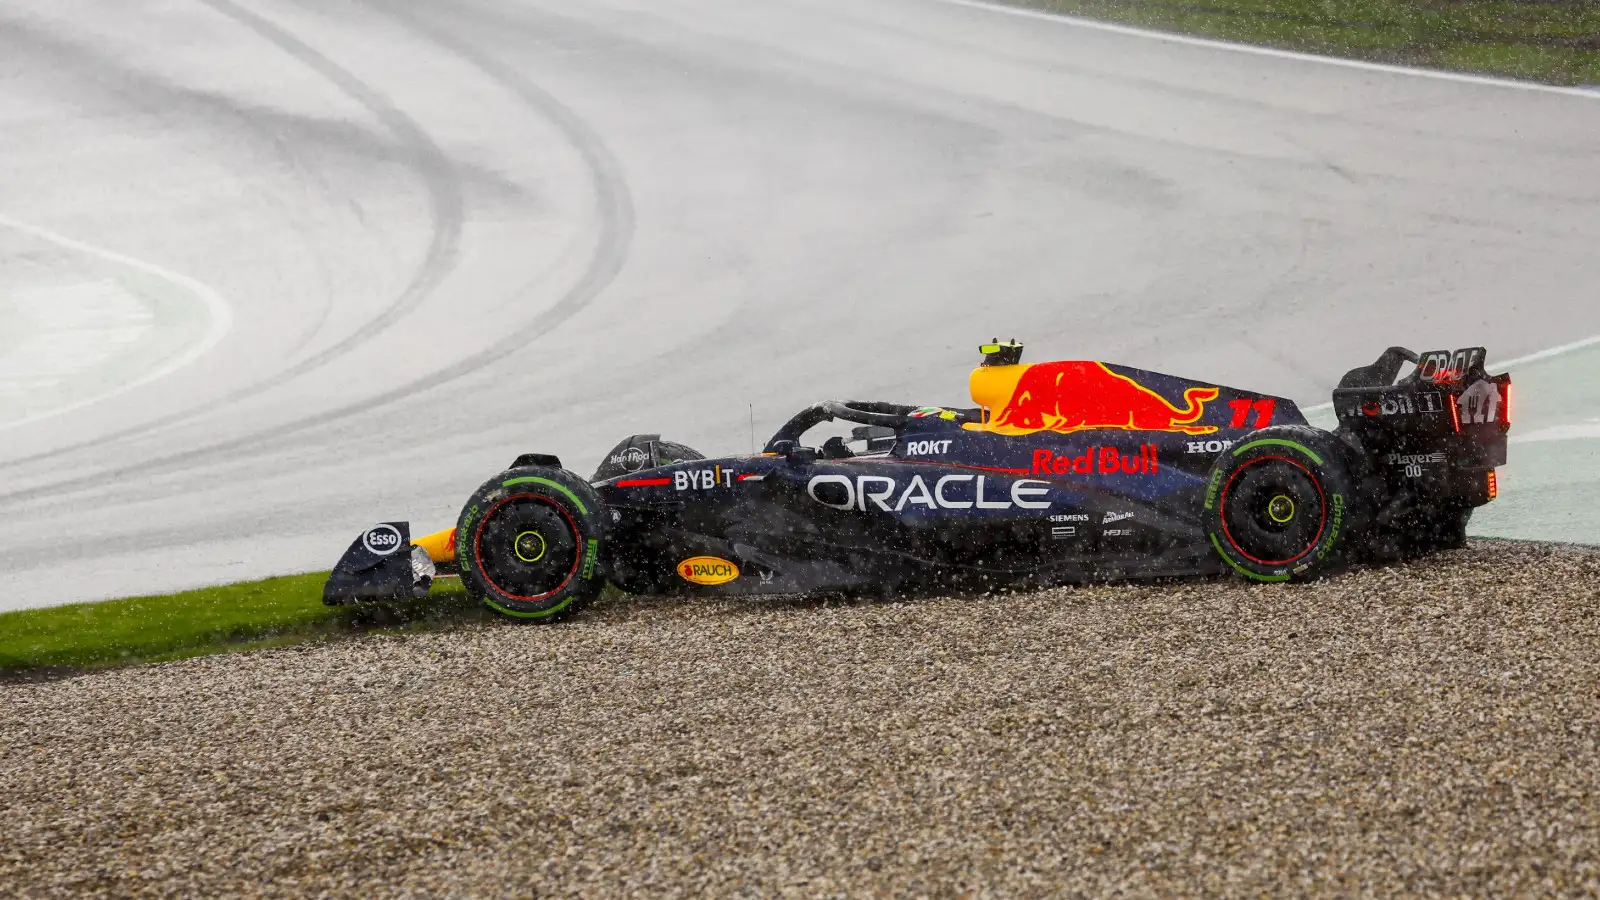 Sergio Perez, Red Bull driver, makes a mistake at Turn 1 late in the Dutch Grand Prix.